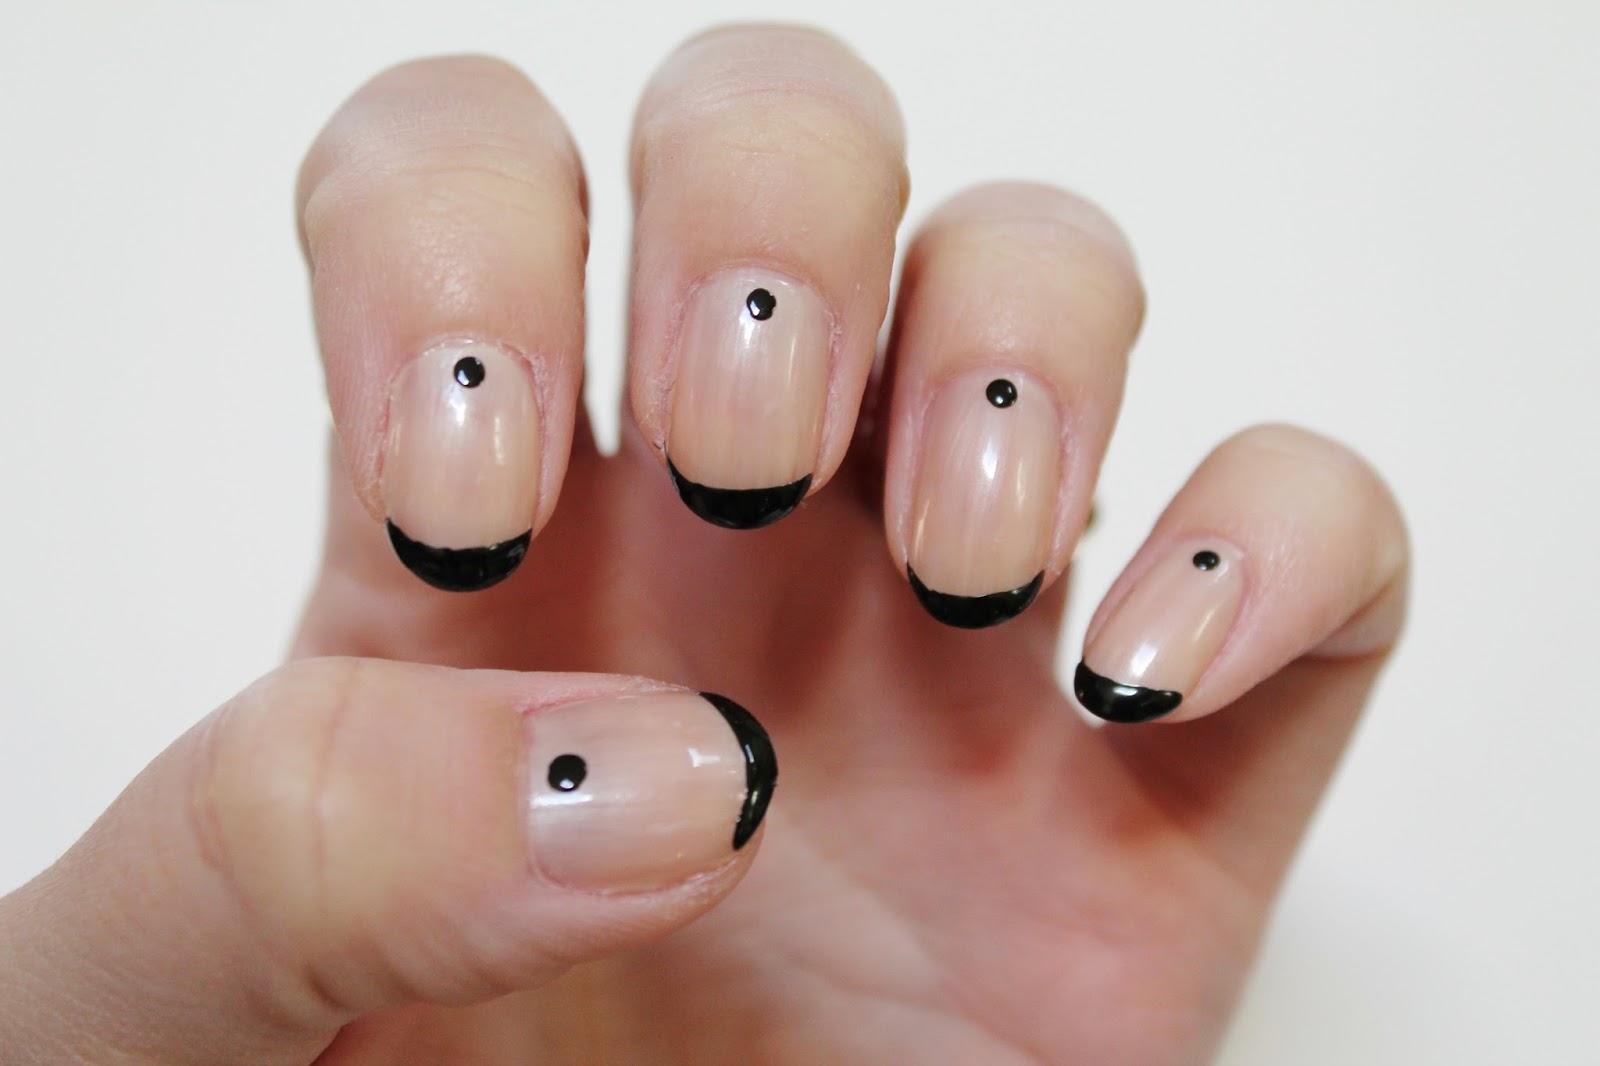 3. 20 Simple Nail Art Ideas for Short Nails - wide 5